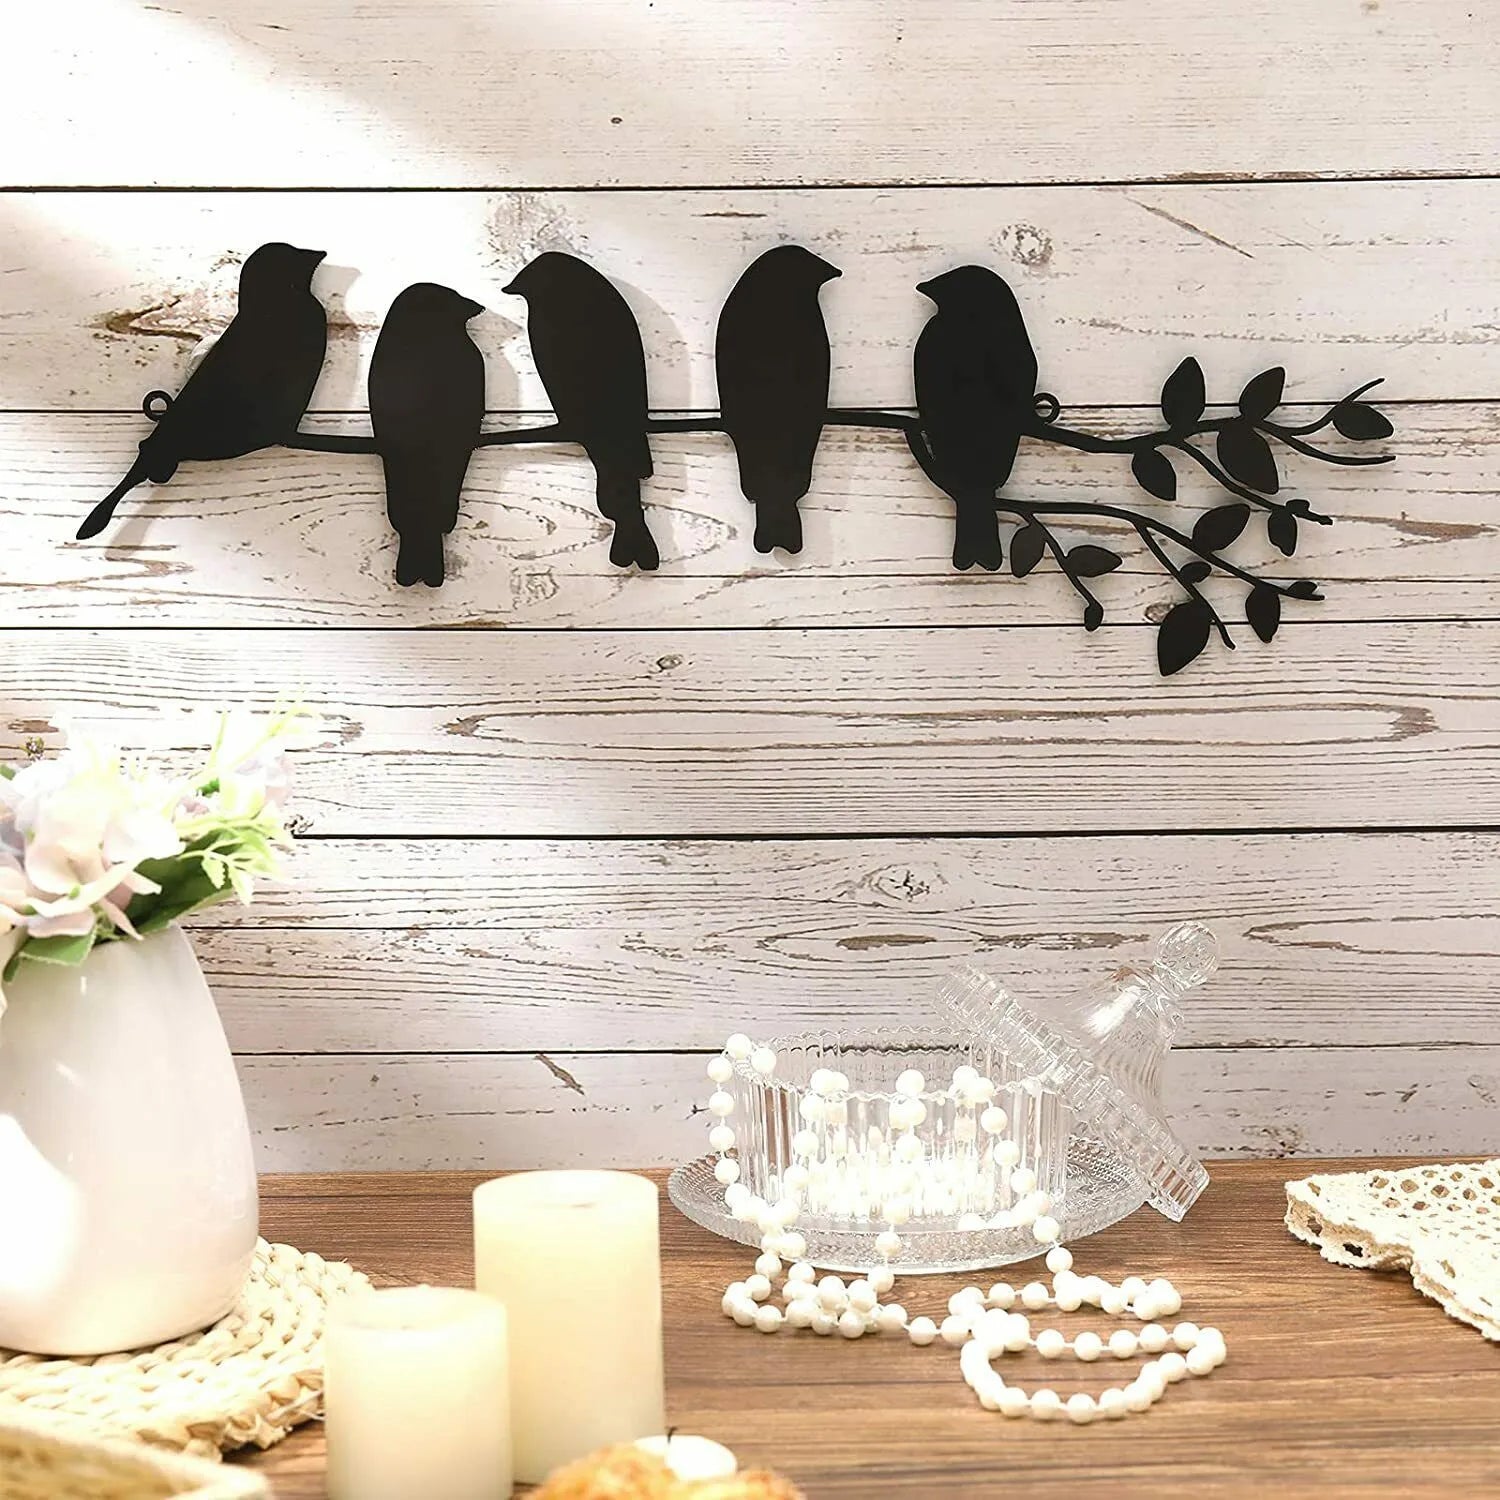 Metal Bird Wall Art 5 Birds On The Branch Wall Sticker or Leaves With Birds Sculpture Animal Type Retro Metal Plate